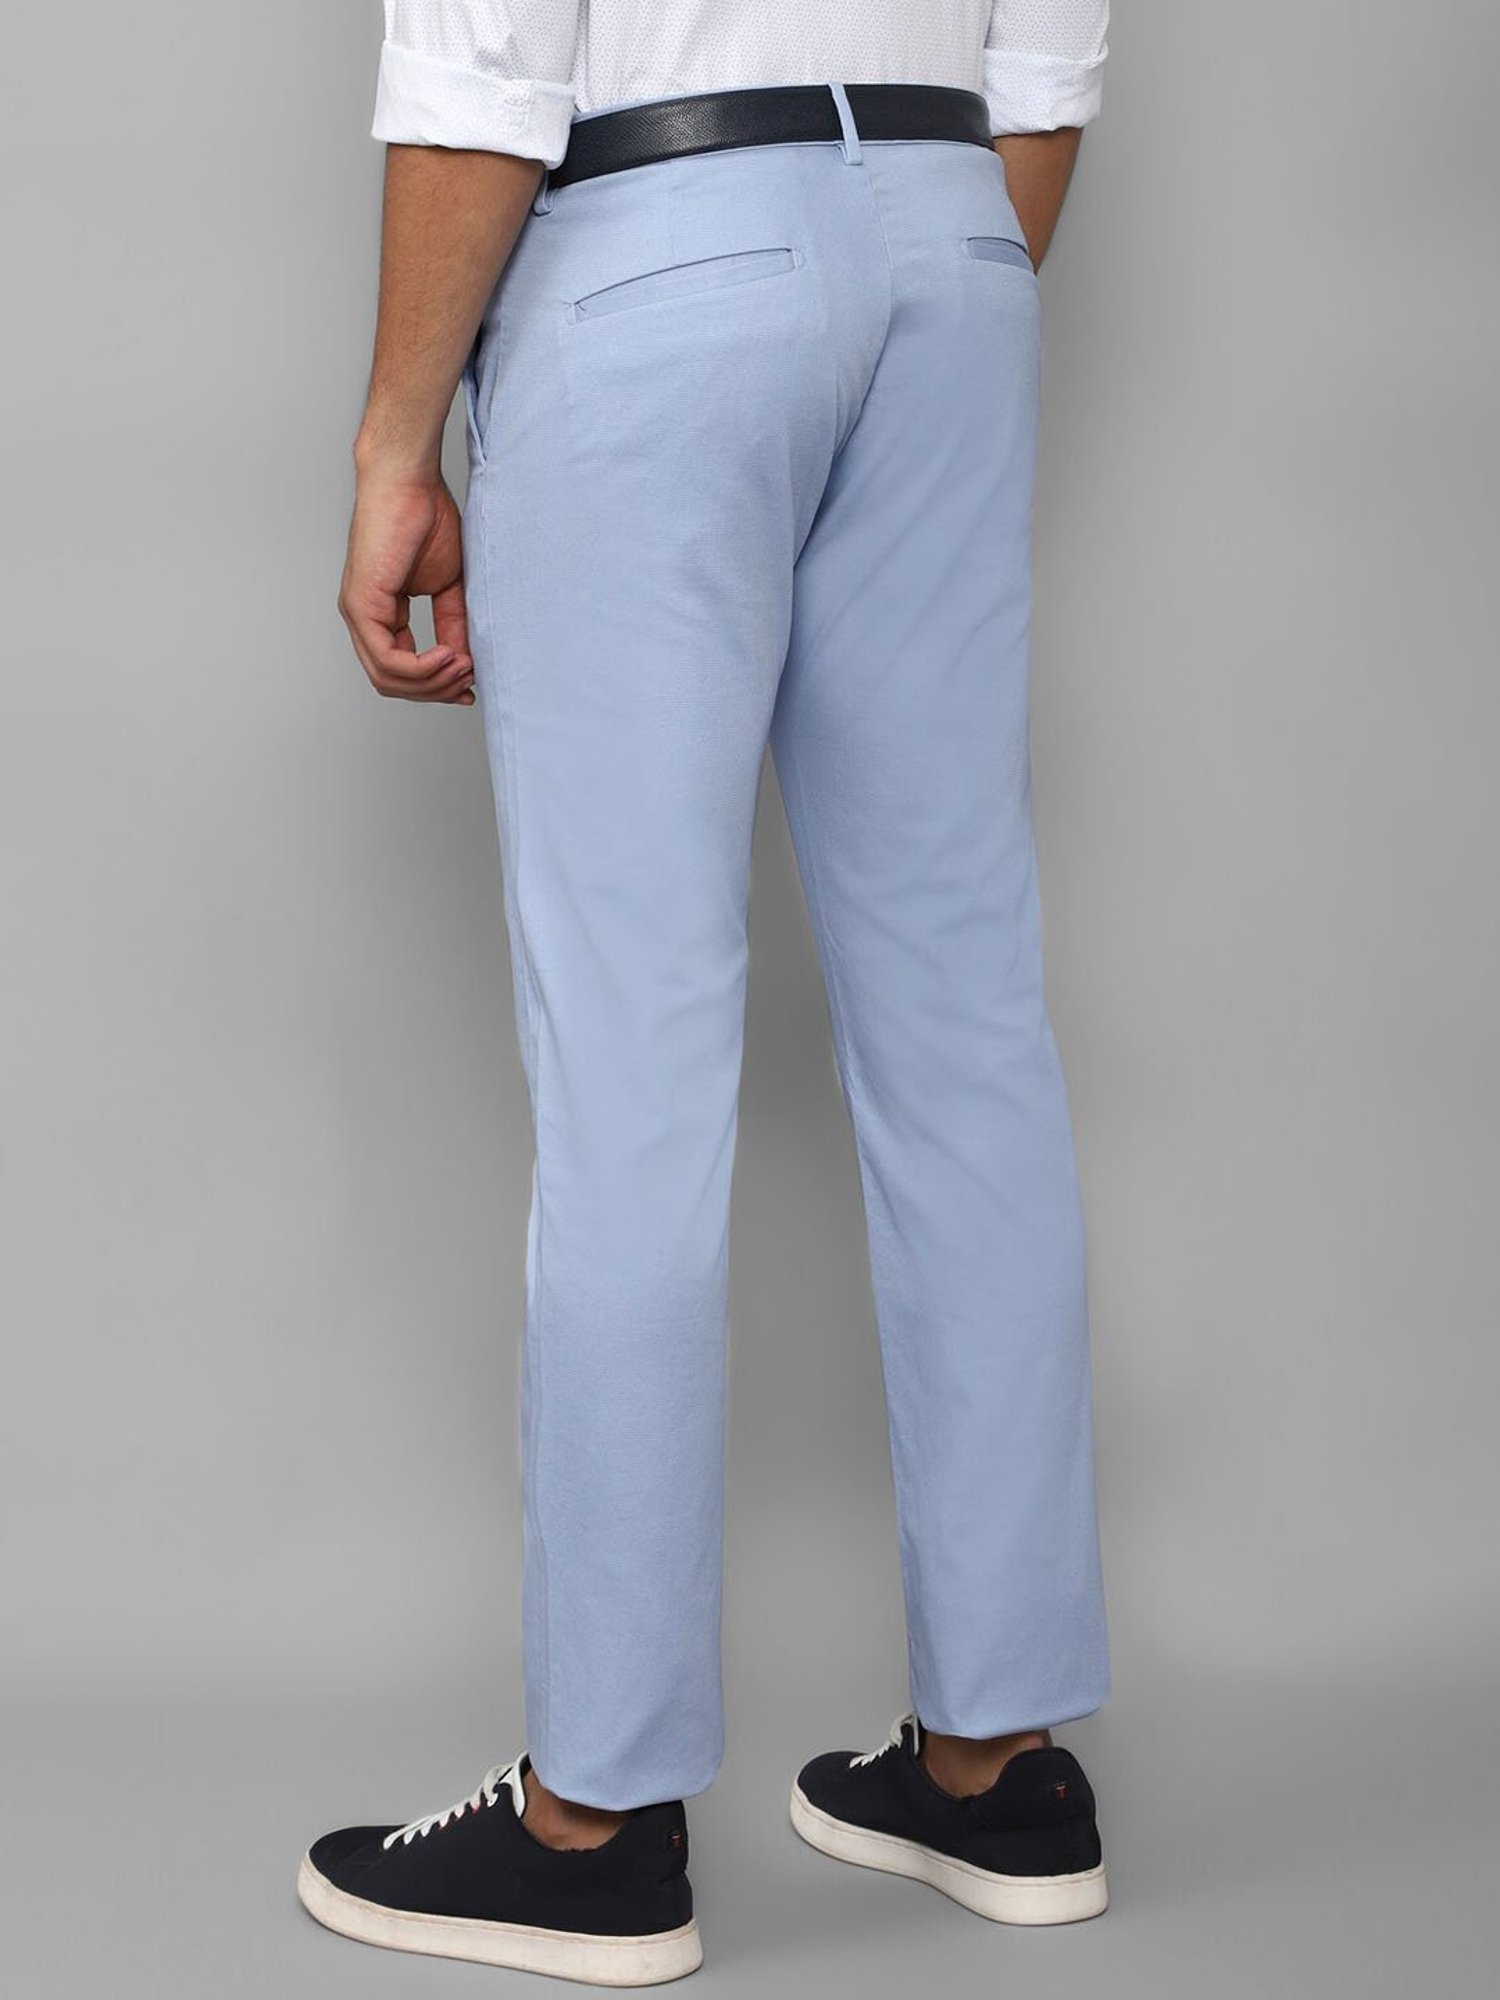 Buy Allen Solly Women Cream Slim fit Regular pants Online at Low Prices in  India - Paytmmall.com